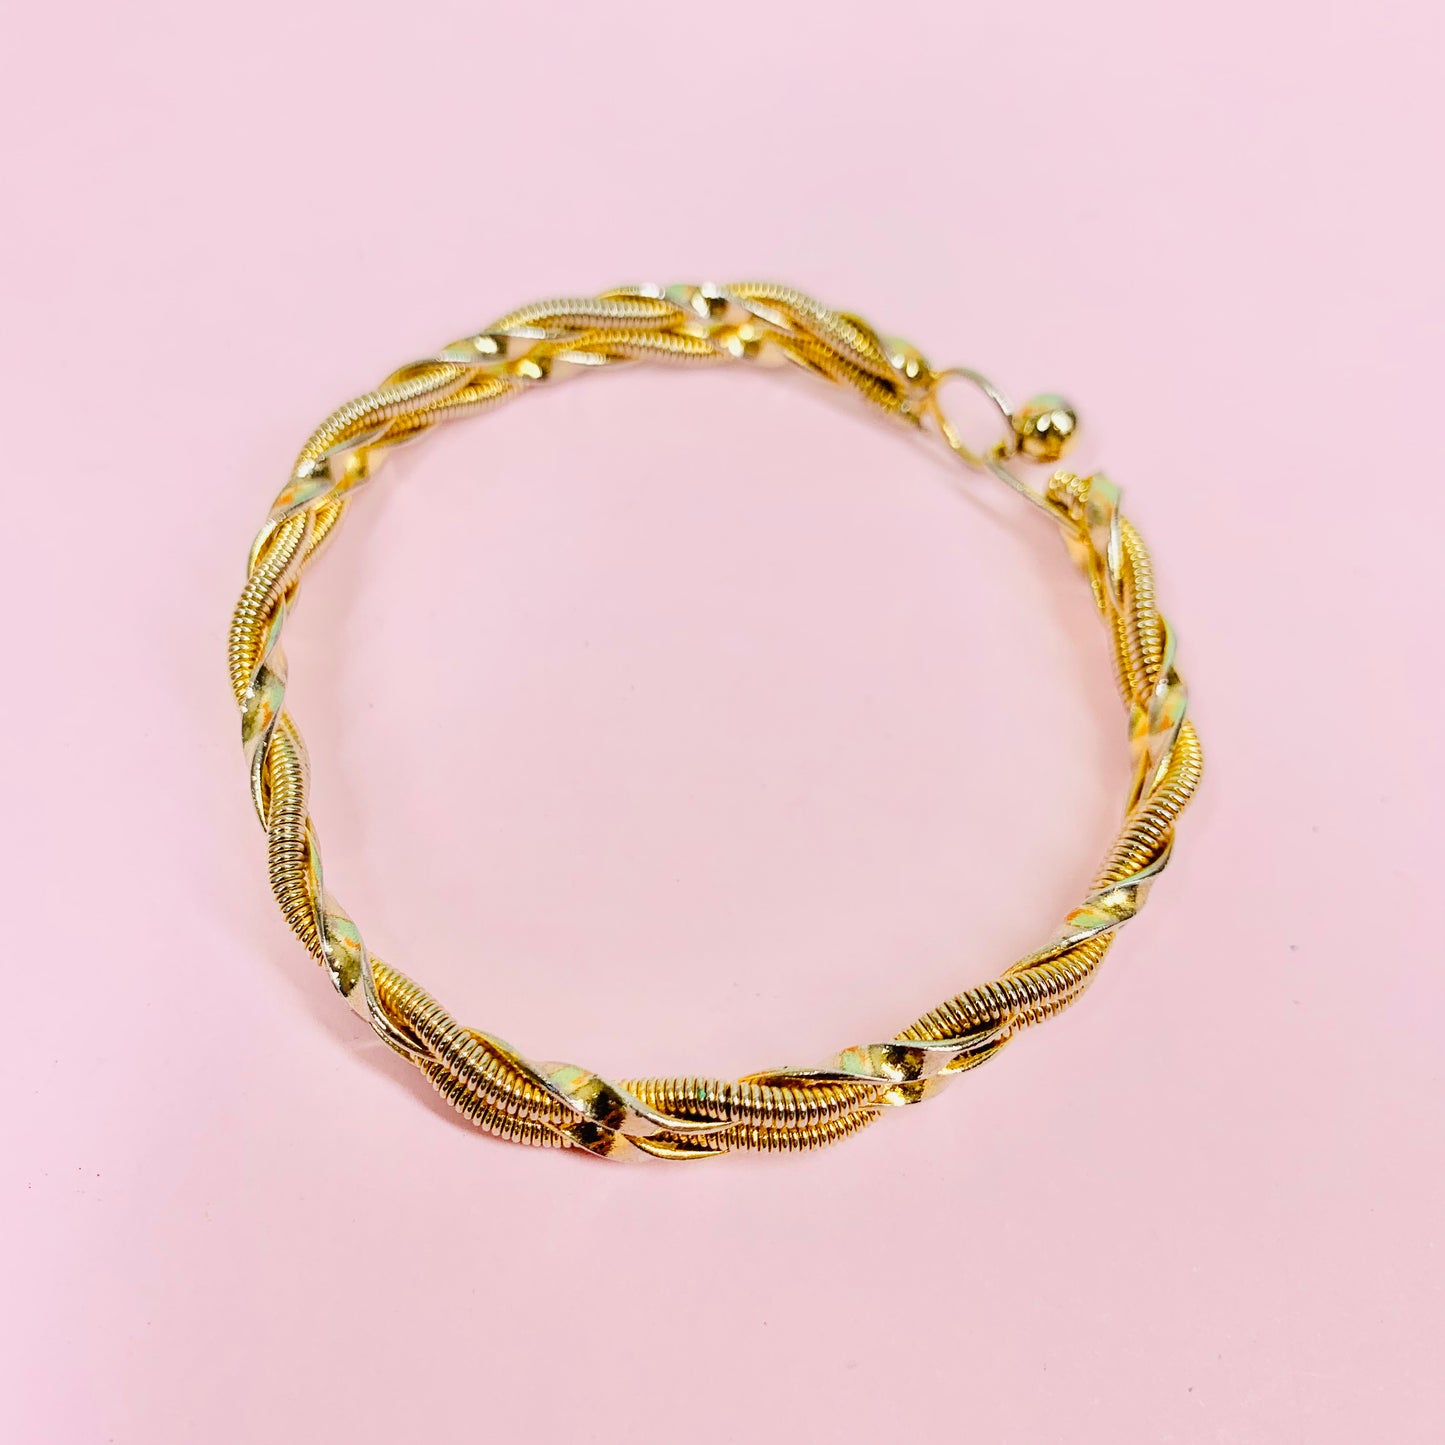 1950s gold plated twist rope bangle